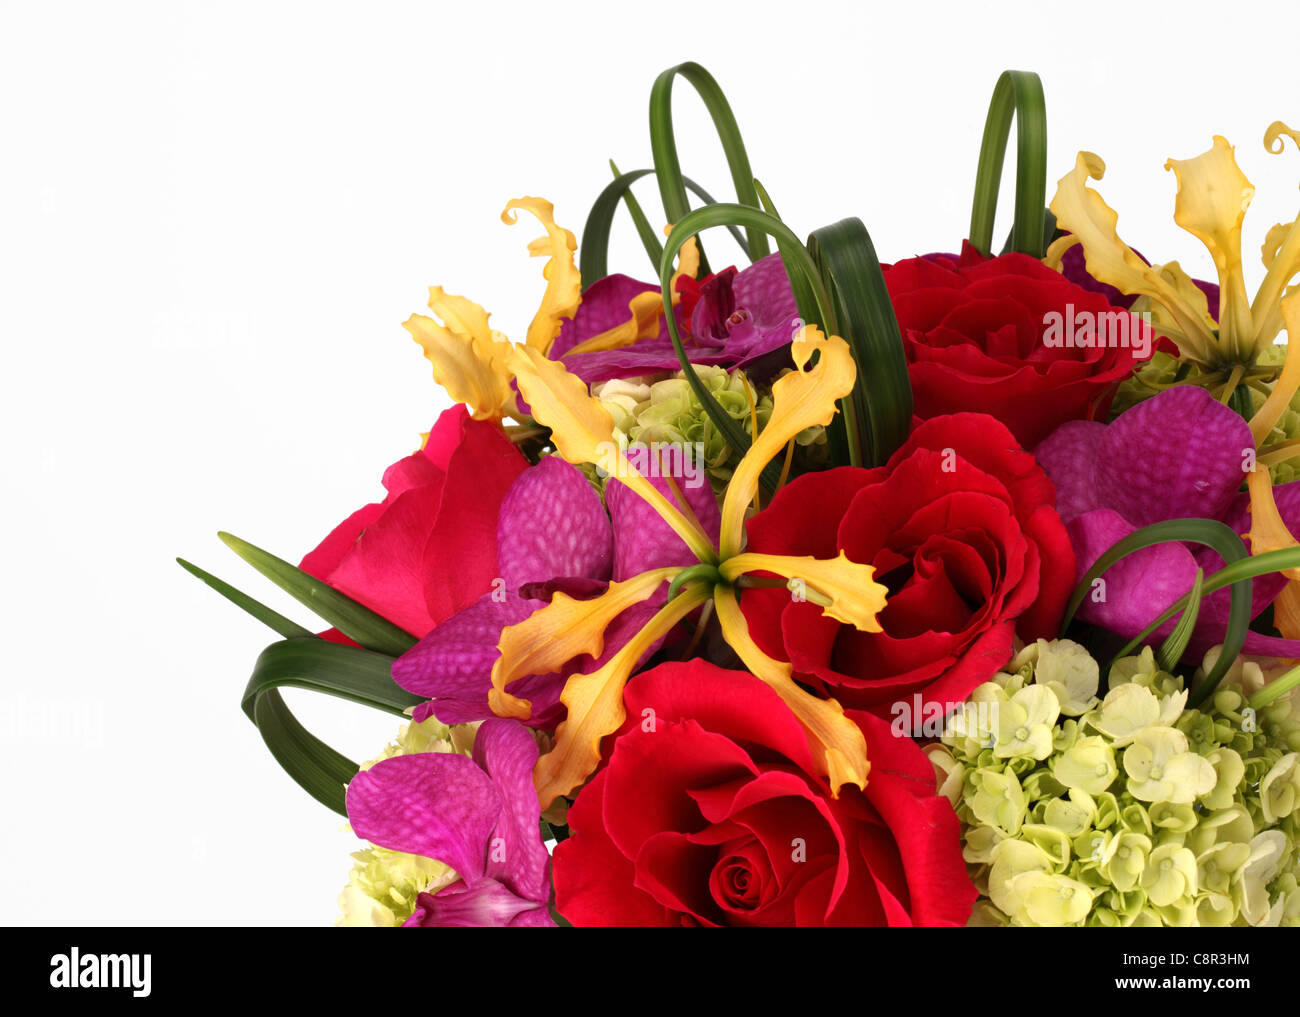 A close-up of a colorful bouquet of flowers. Red roses, cream hydrangea, yellow orchid [Laelia], purple orchid [Vanda] Stock Photo